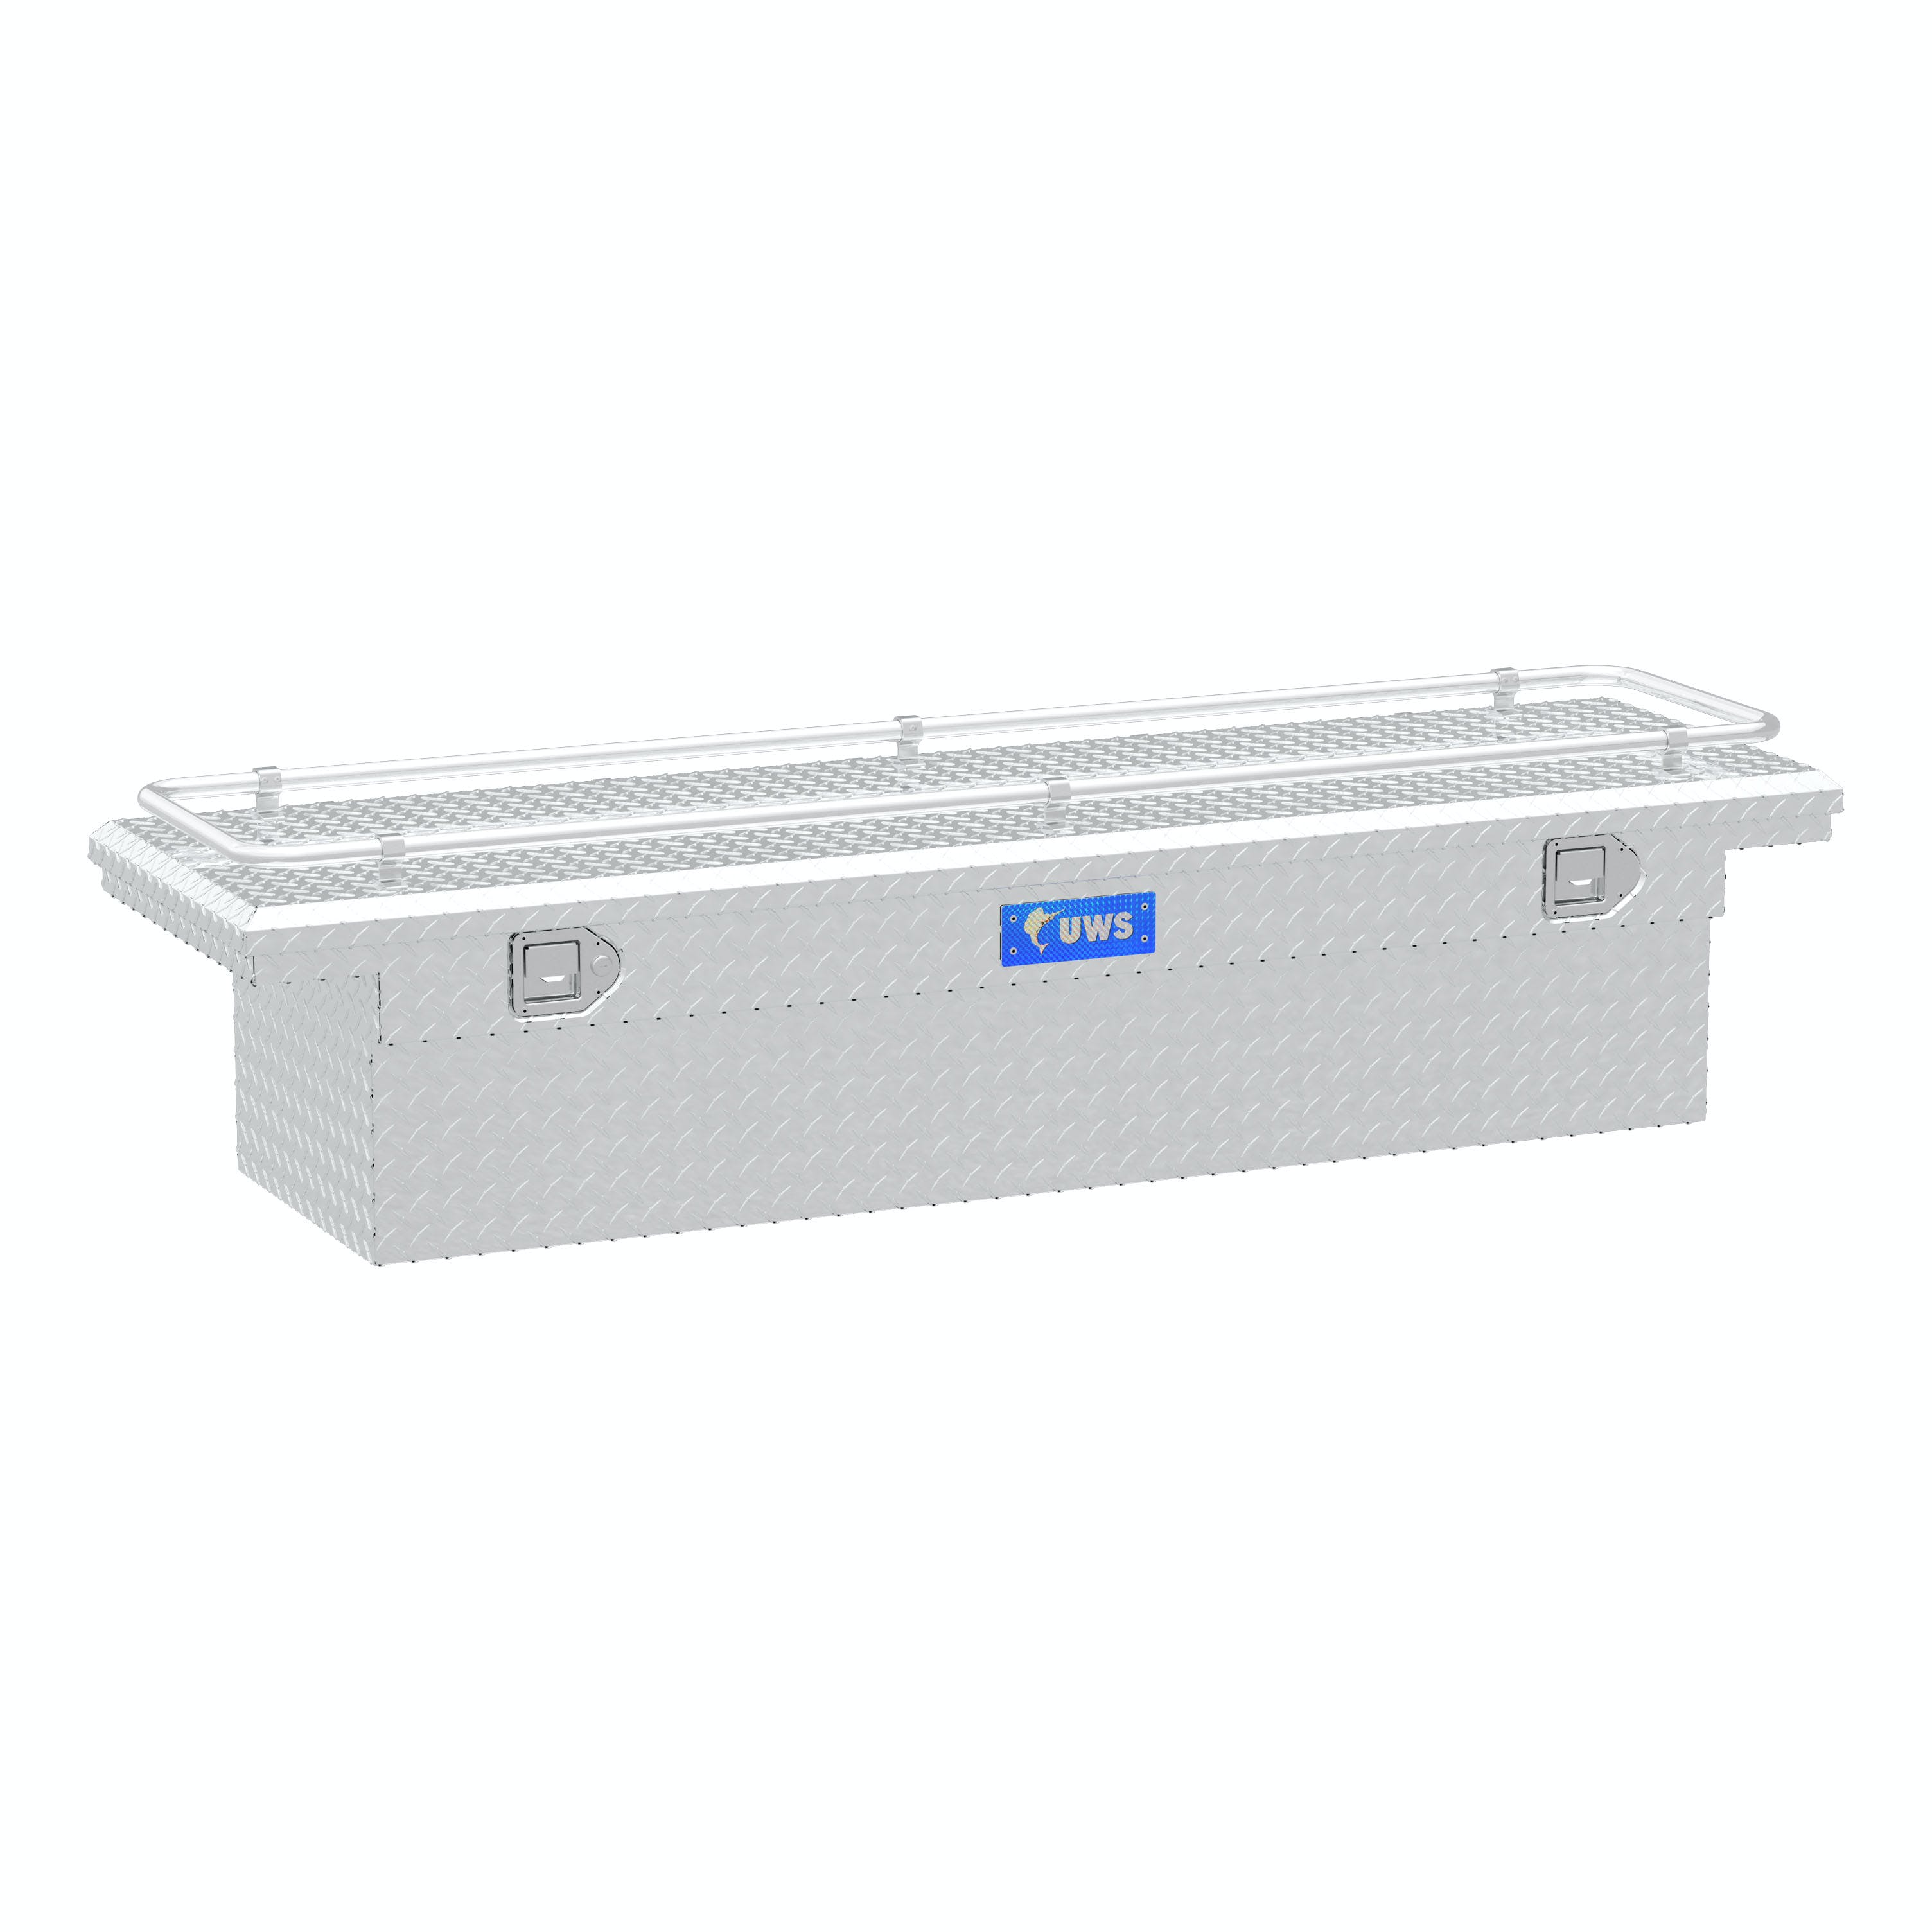 UWS TBS-69-LP-R 69 inch Aluminum Single Lid Crossover Toolbox Low Profile with Rail